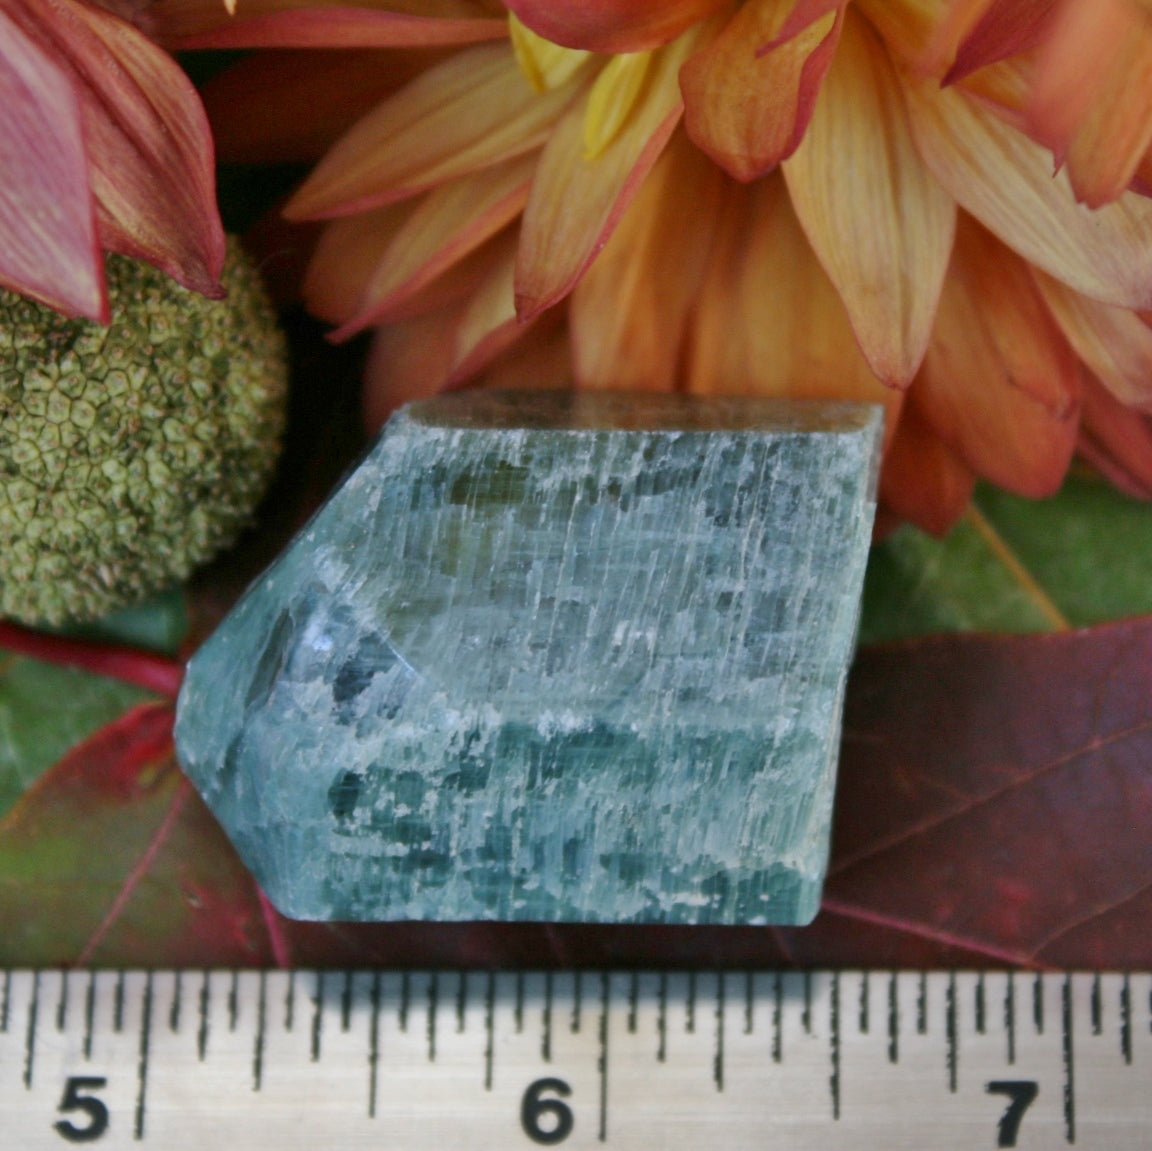 Rare Blue Apatite Crystal Specimen from Russia, 52 grams